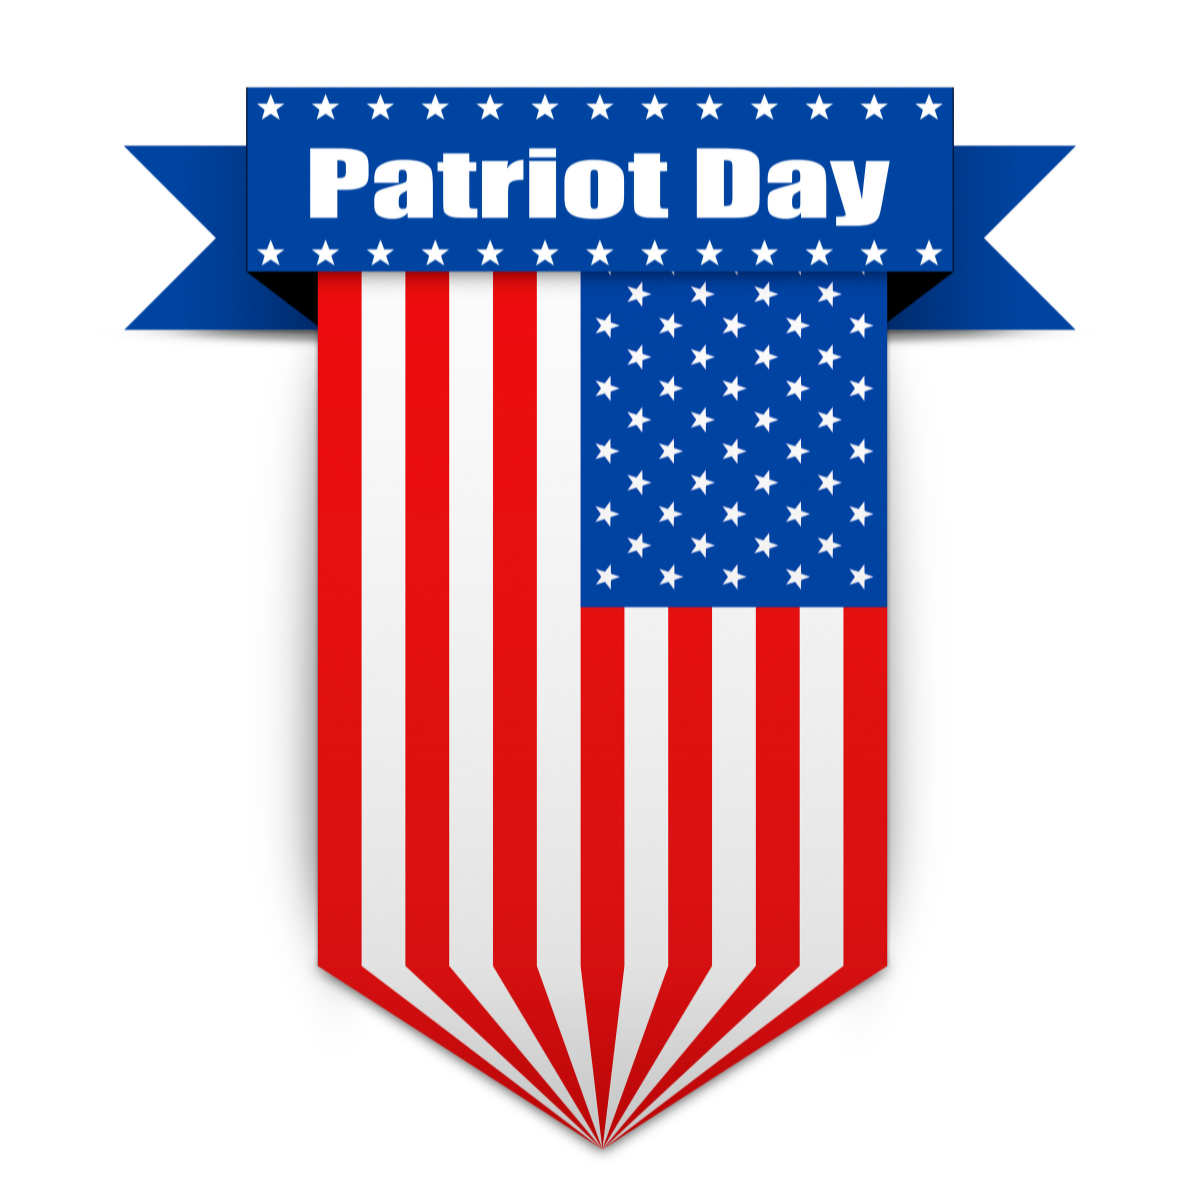 Patriots' Day 2023 Quotes, Images, Messages, Slogans, Posters, Stickers, Captions and Cliparts